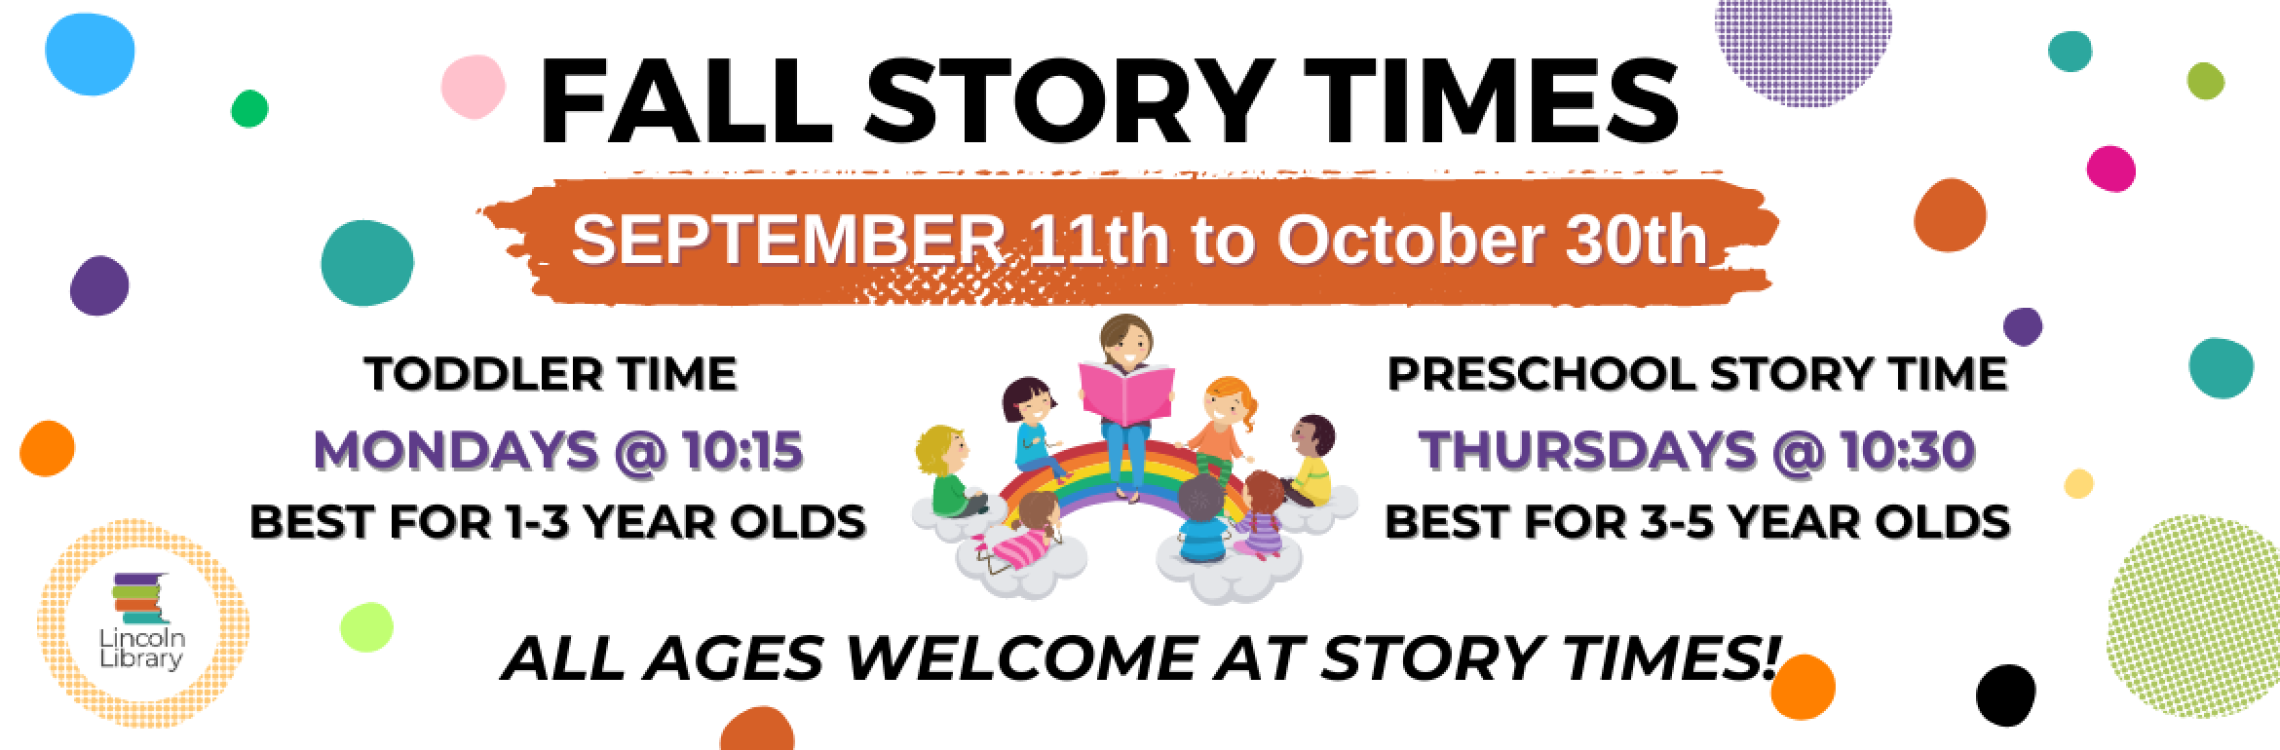 September 11th through October 30th, Toddler Time is Mondays at 10:15 and Preschool Story Time is Thursdays at 10:30.